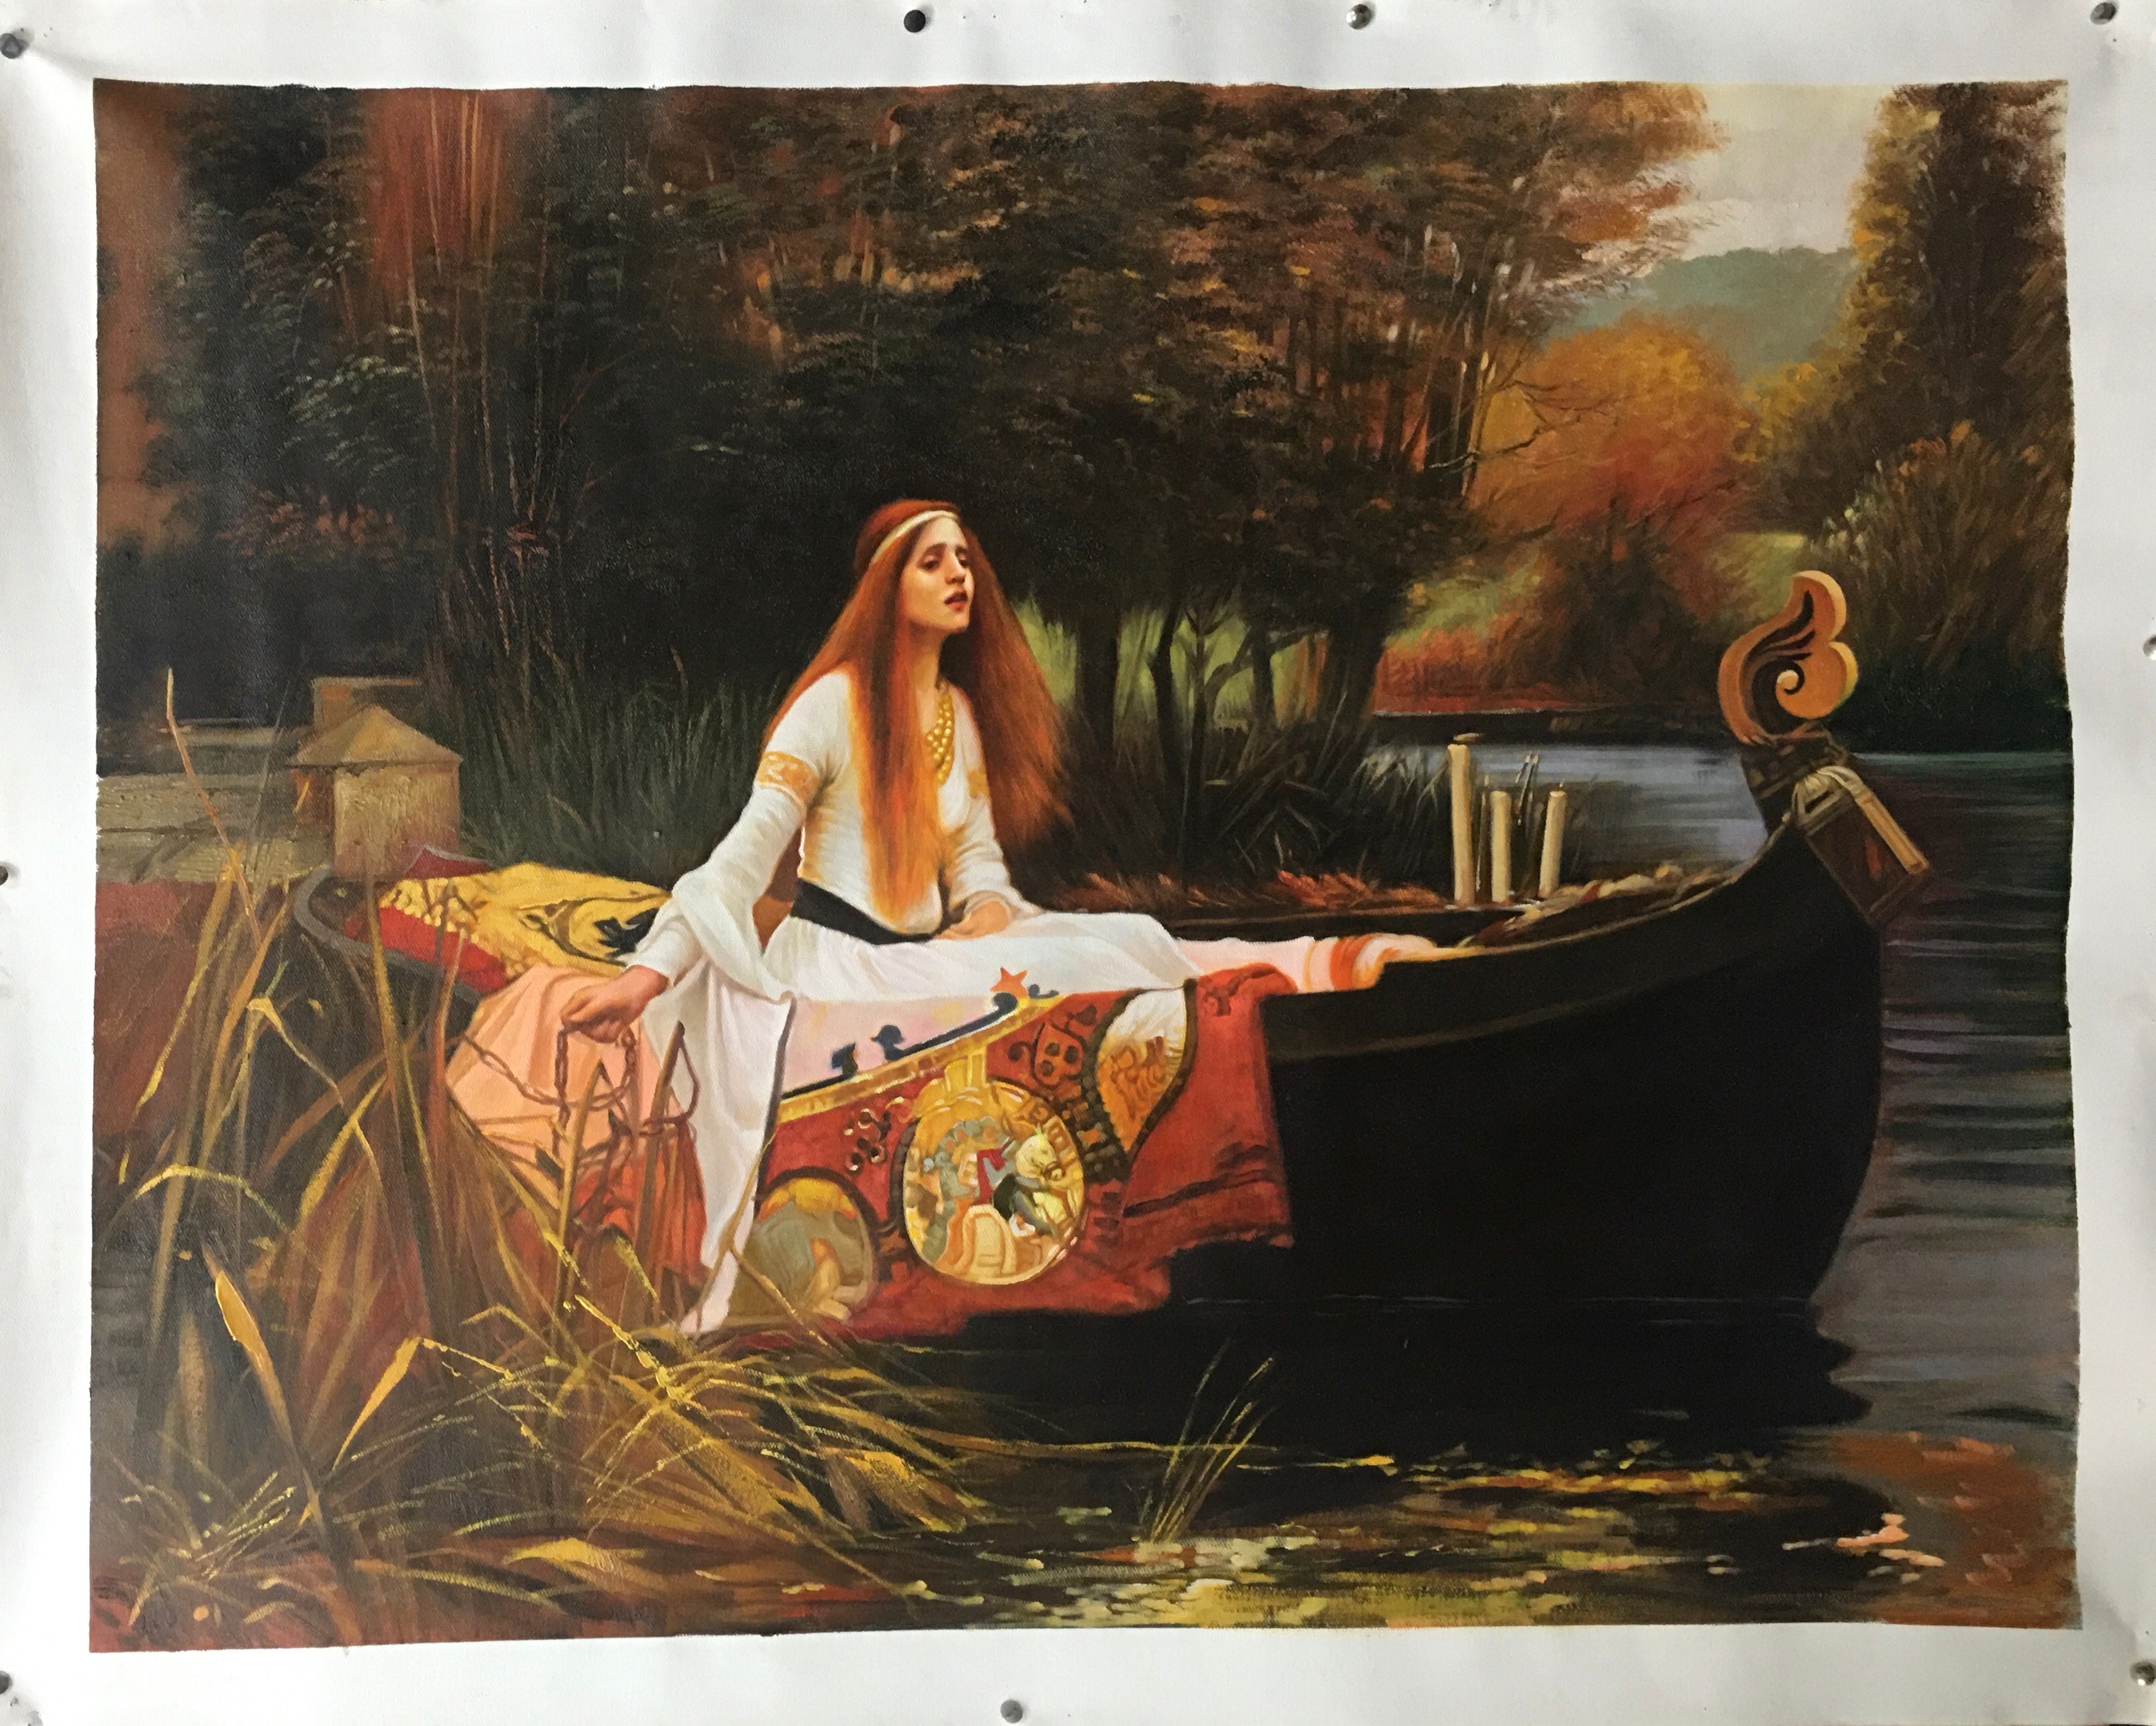 Replica of the Lady of Shalott